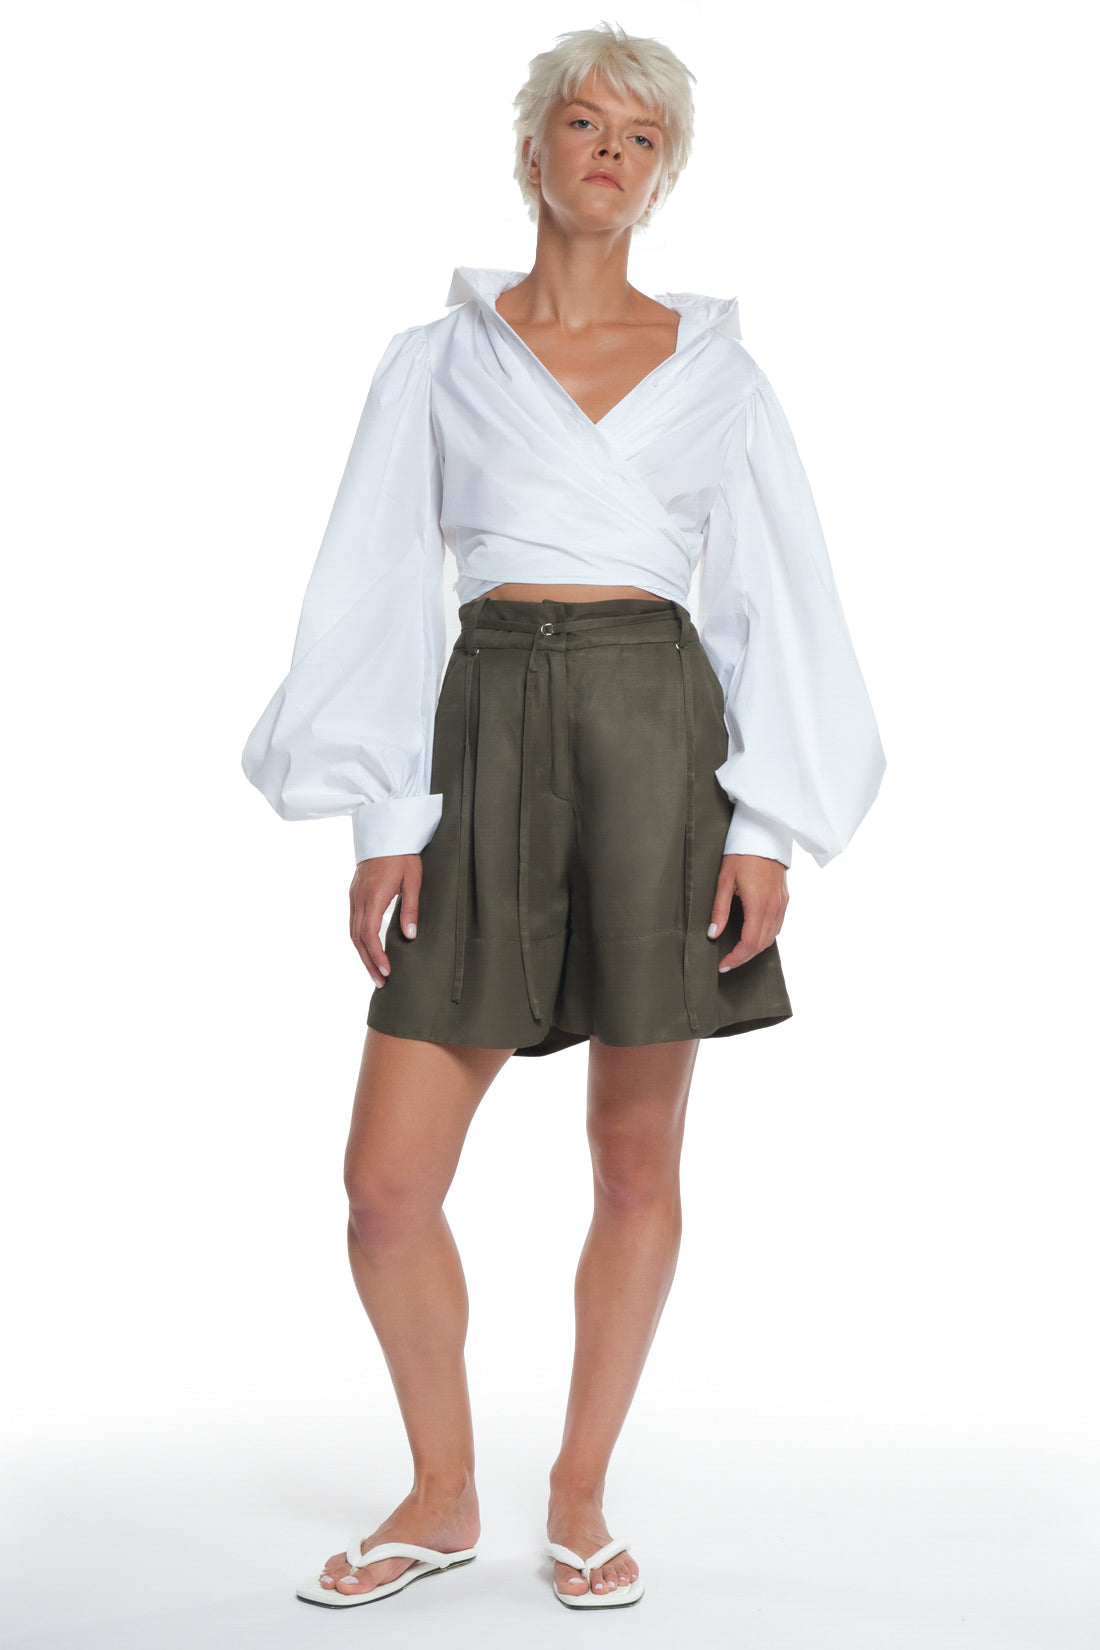 HIGH-WAISTED SHORTS WITH THIN BELT AND DETAILS, ONE POCKET ON THE BACK